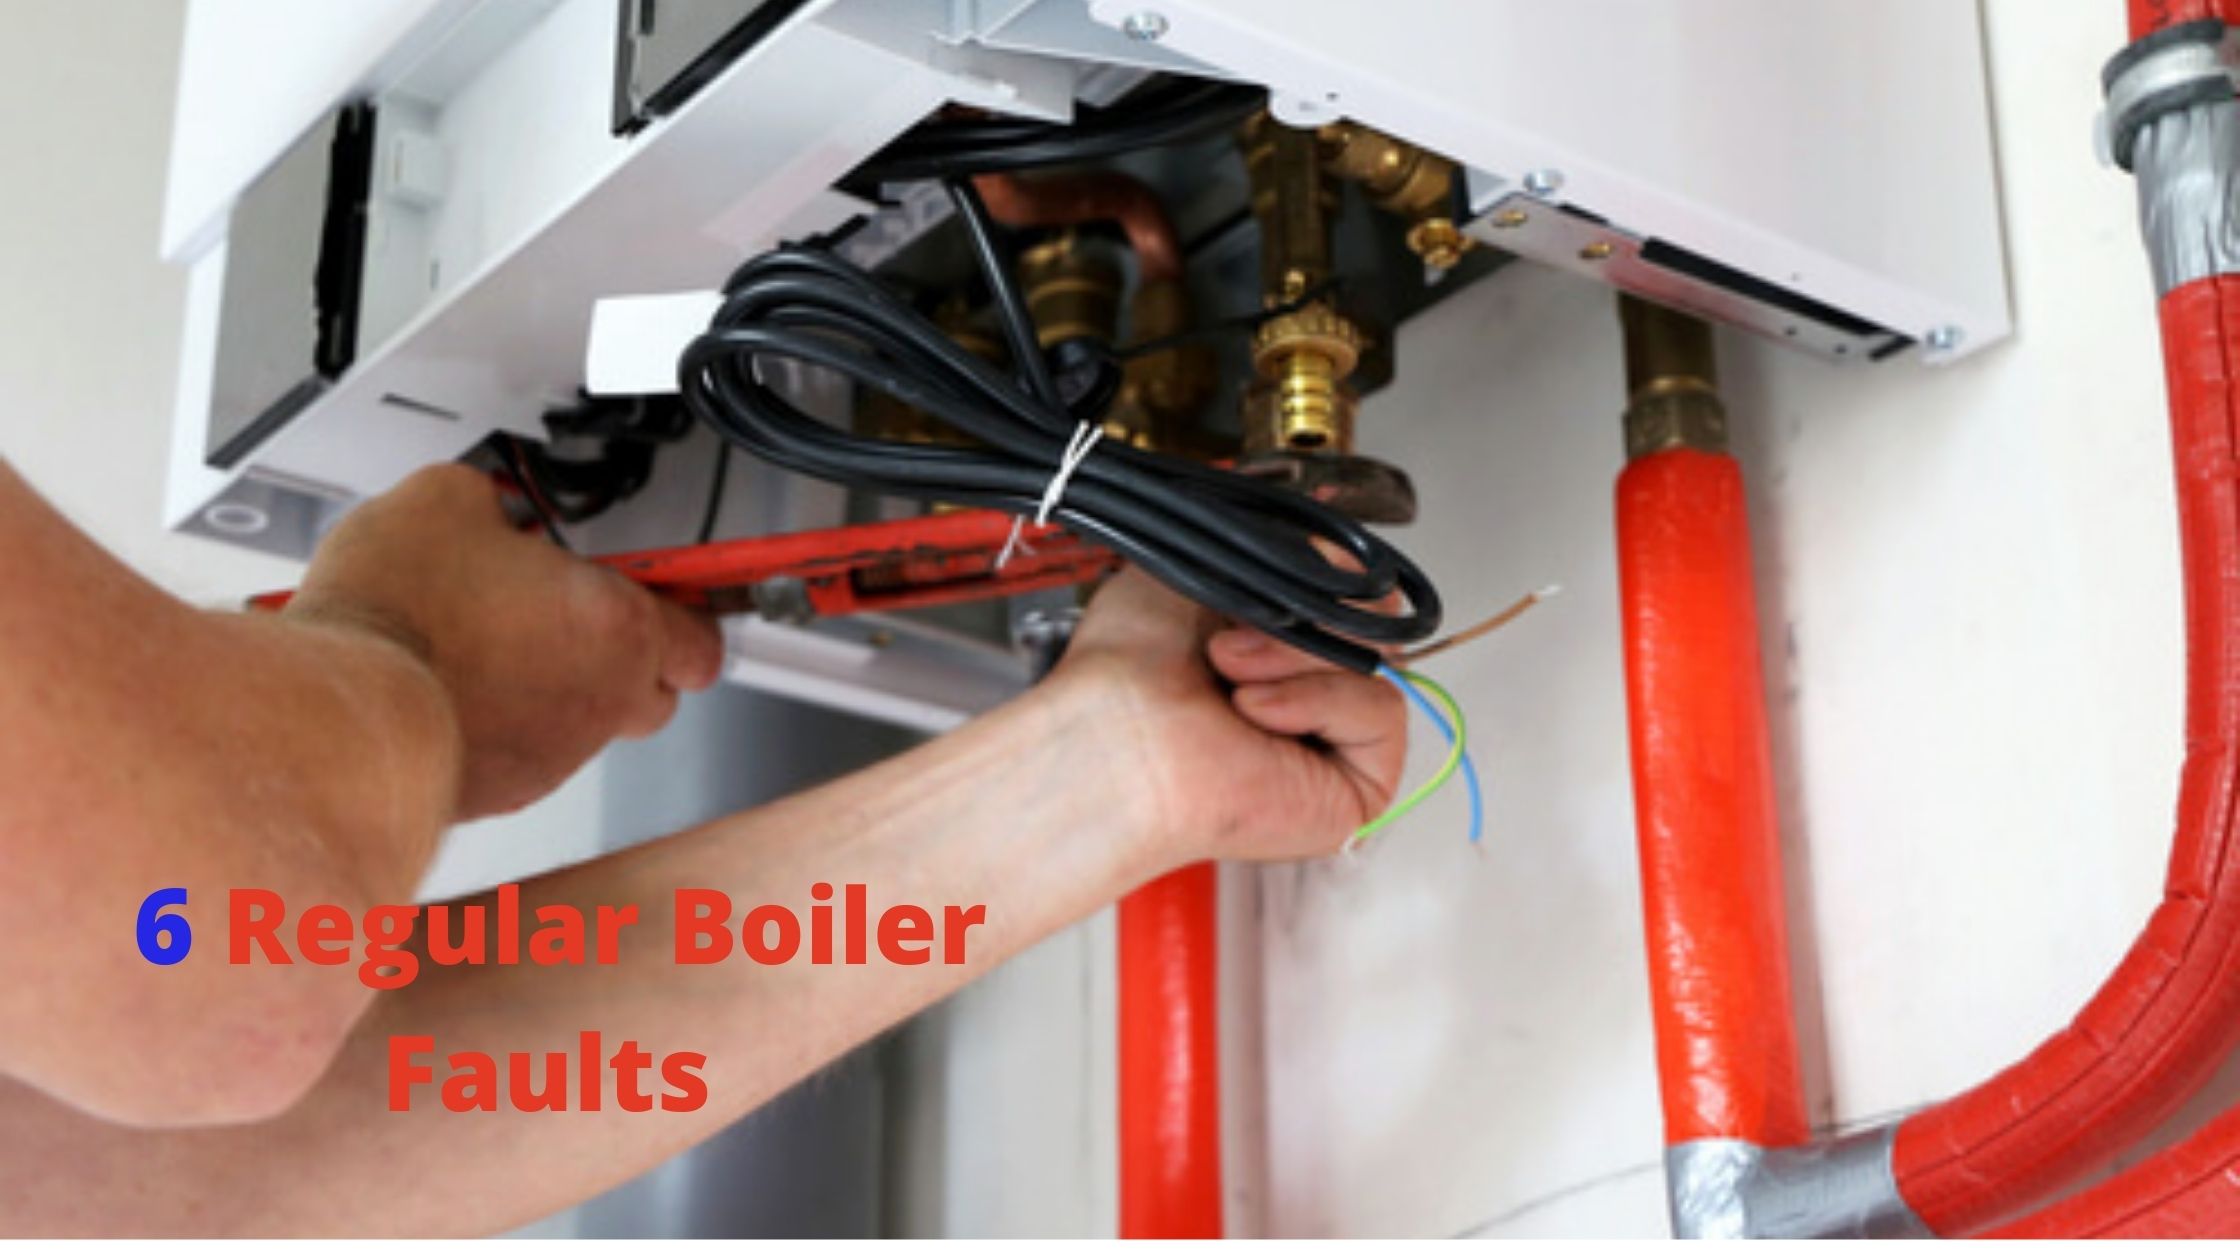 6 Regular Boiler Faults Often Done By the Homeowners